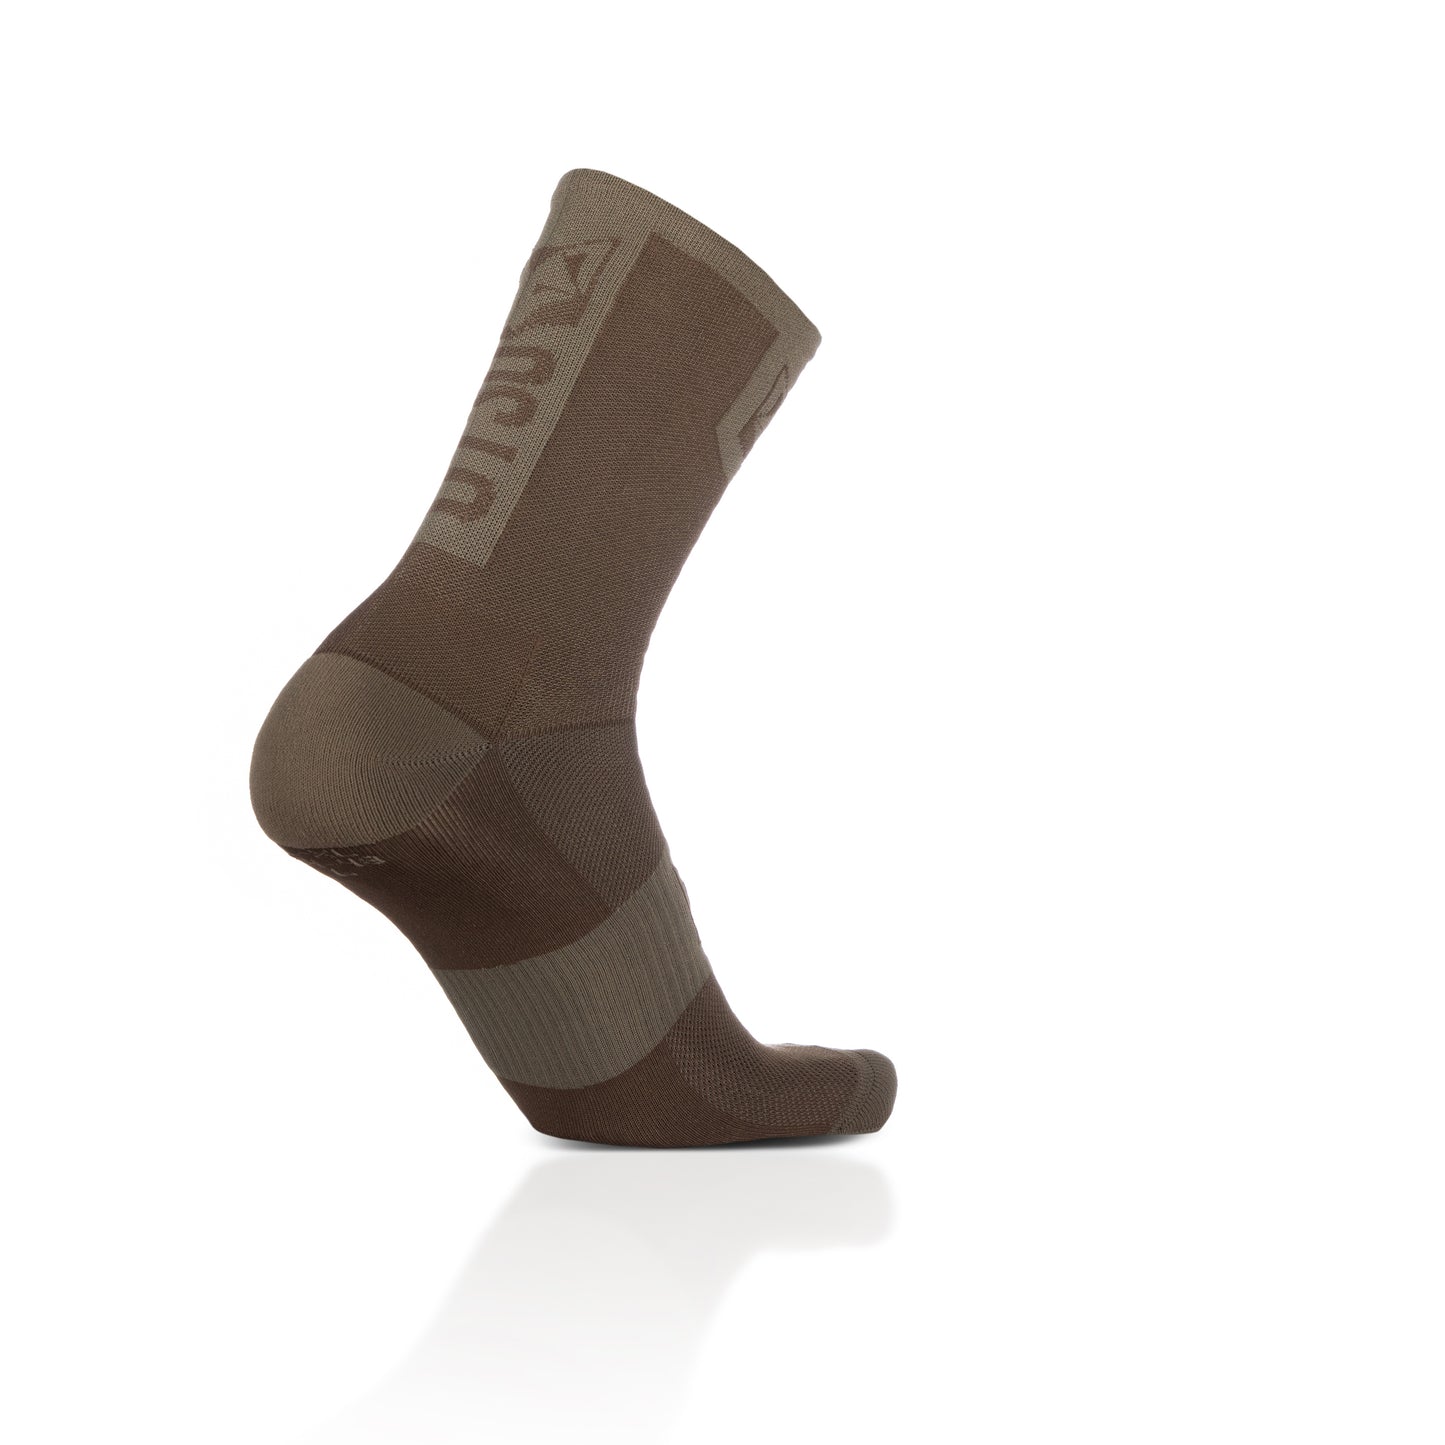 Calcetines de Ciclismo High Cut - Coffee & Gold (Outlet)